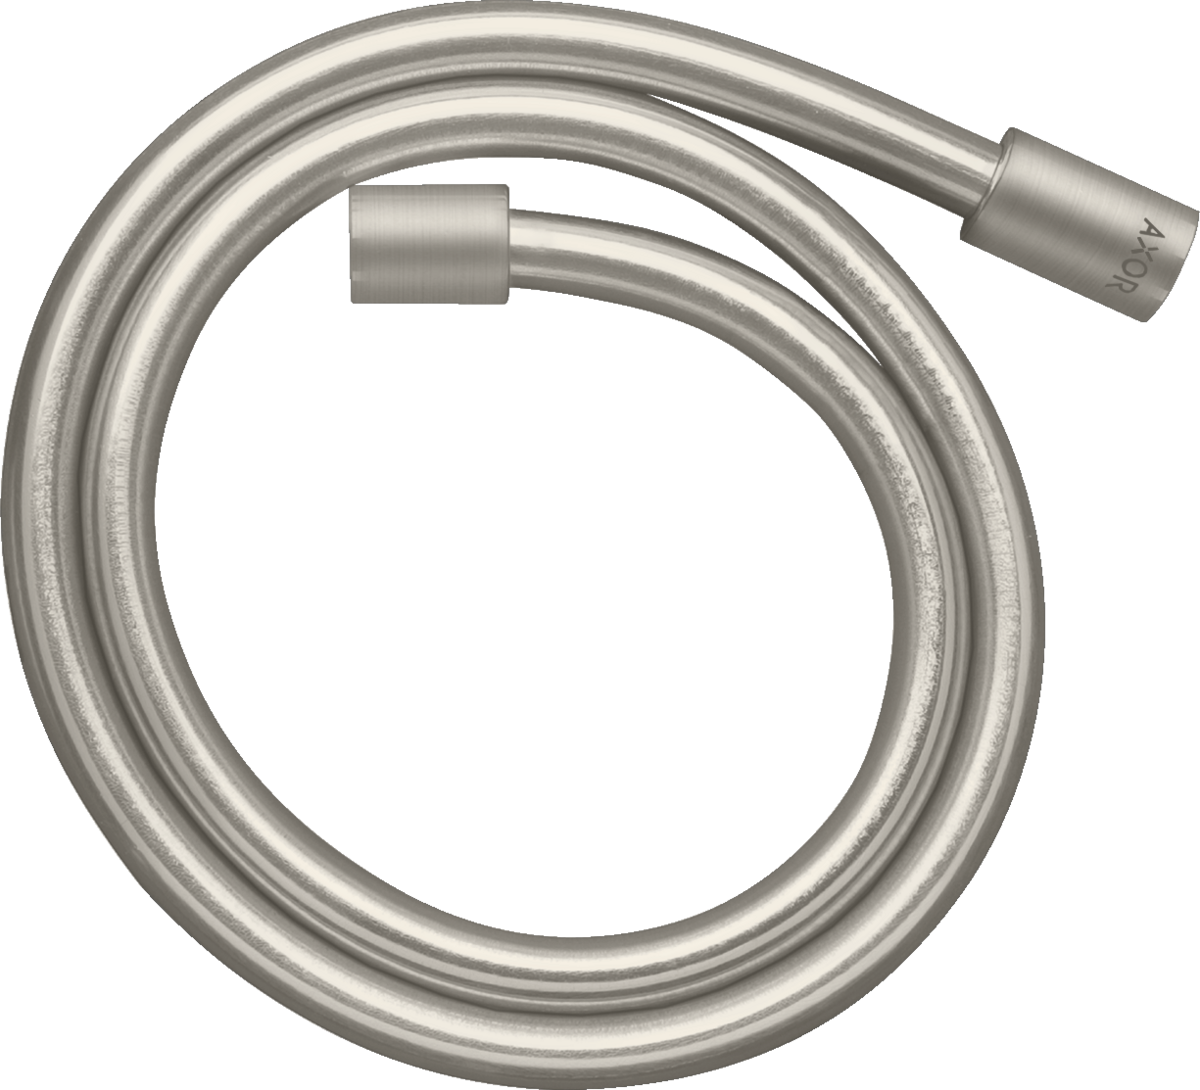 Picture of HANSGROHE AXOR Starck Metal effect shower hose 1.25 m with cylindrical nuts #28282800 - Stainless Steel Optic